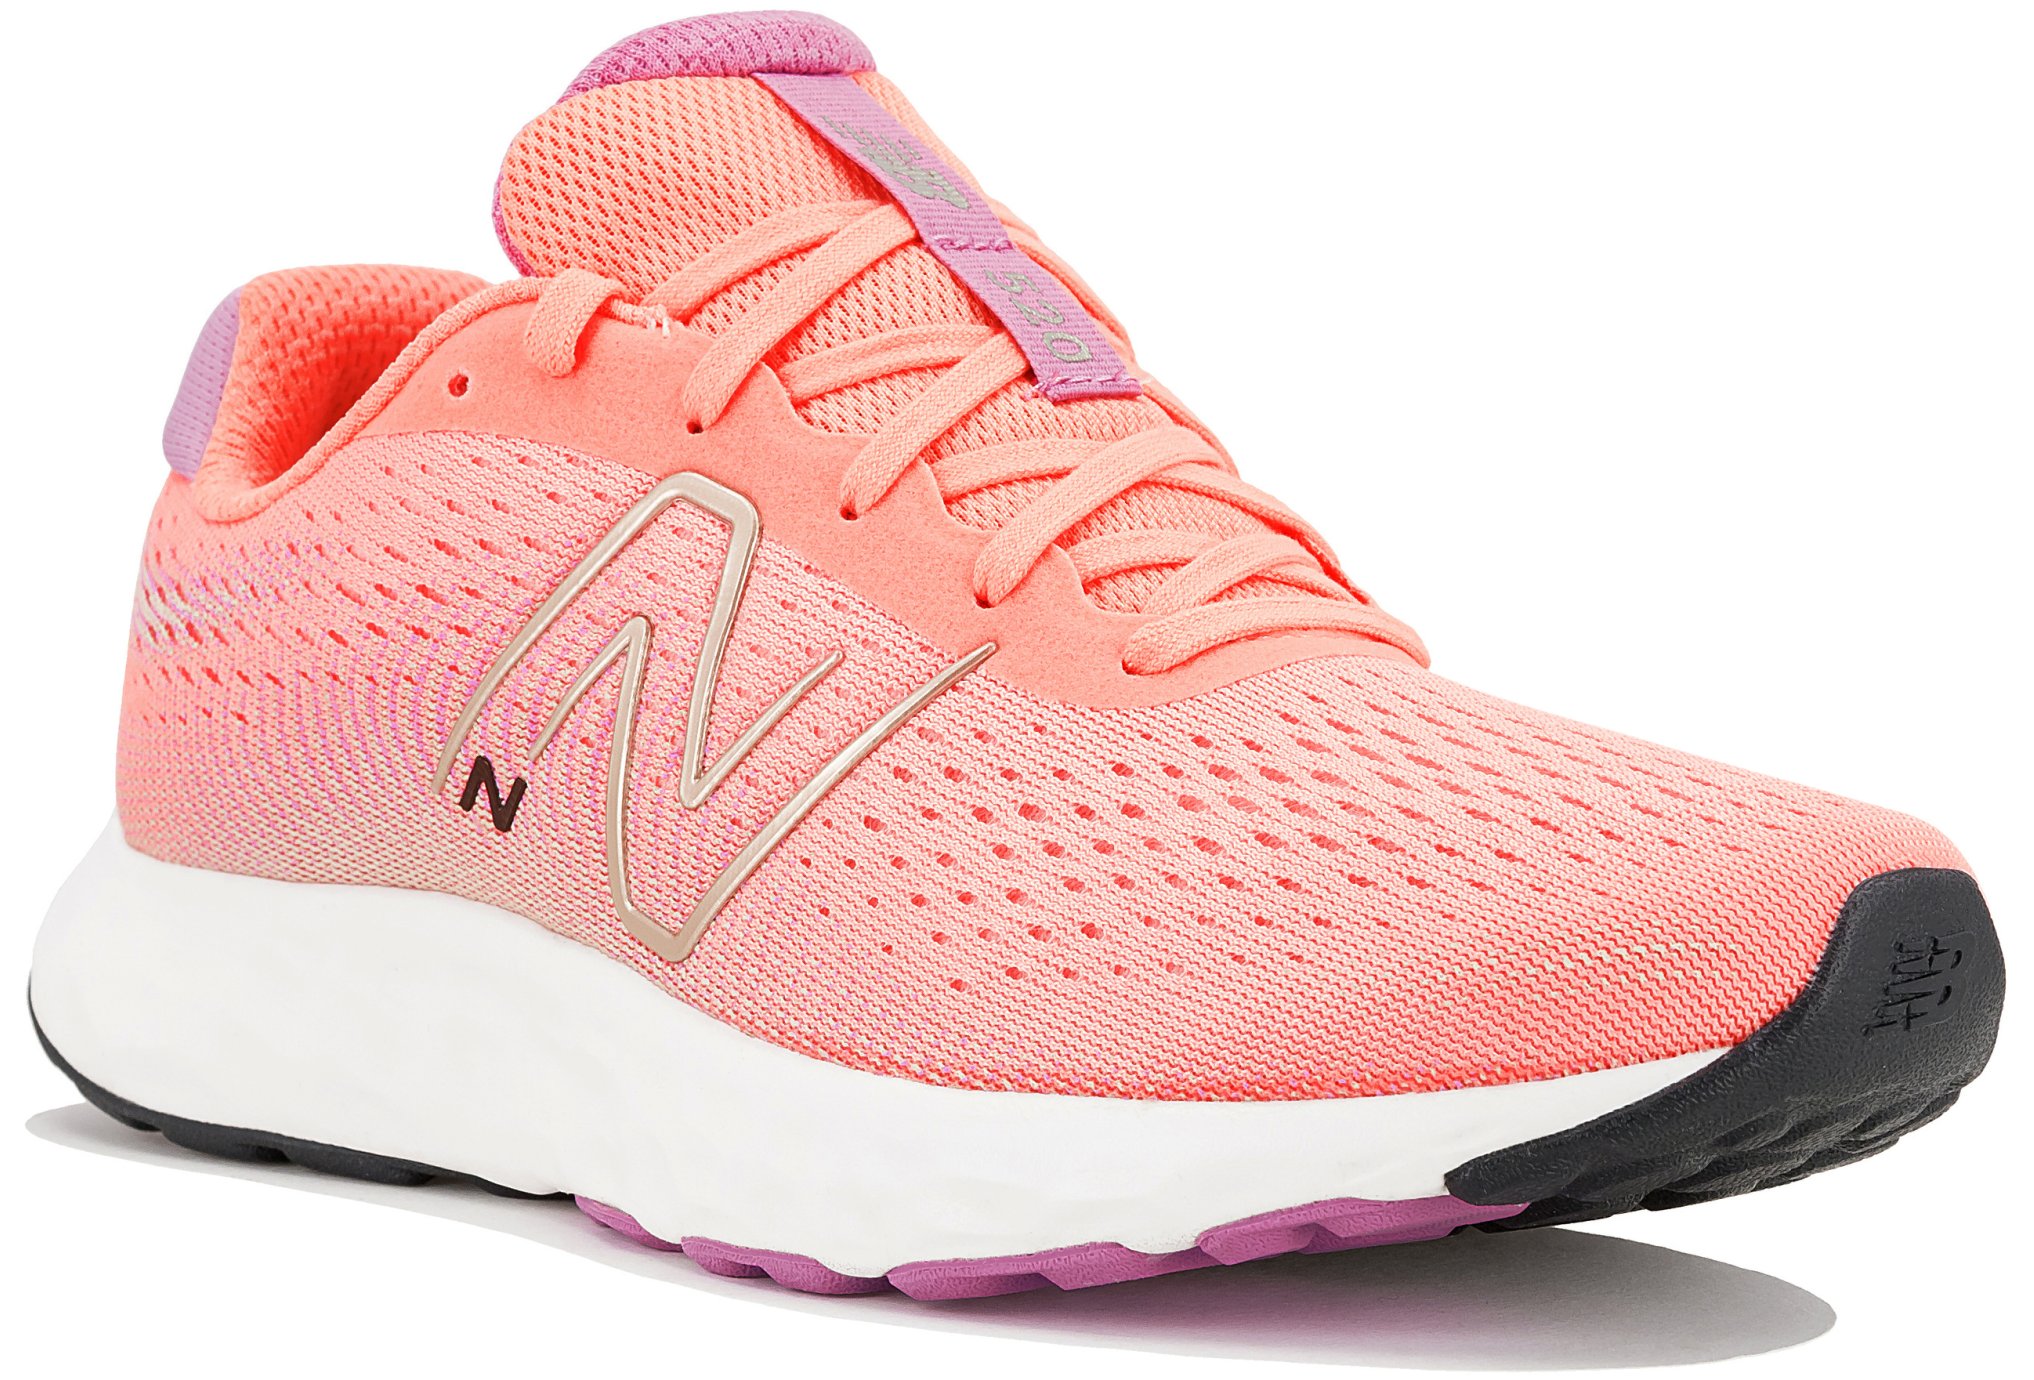 New Balance 520 V8 W Chaussures running femme déstockage